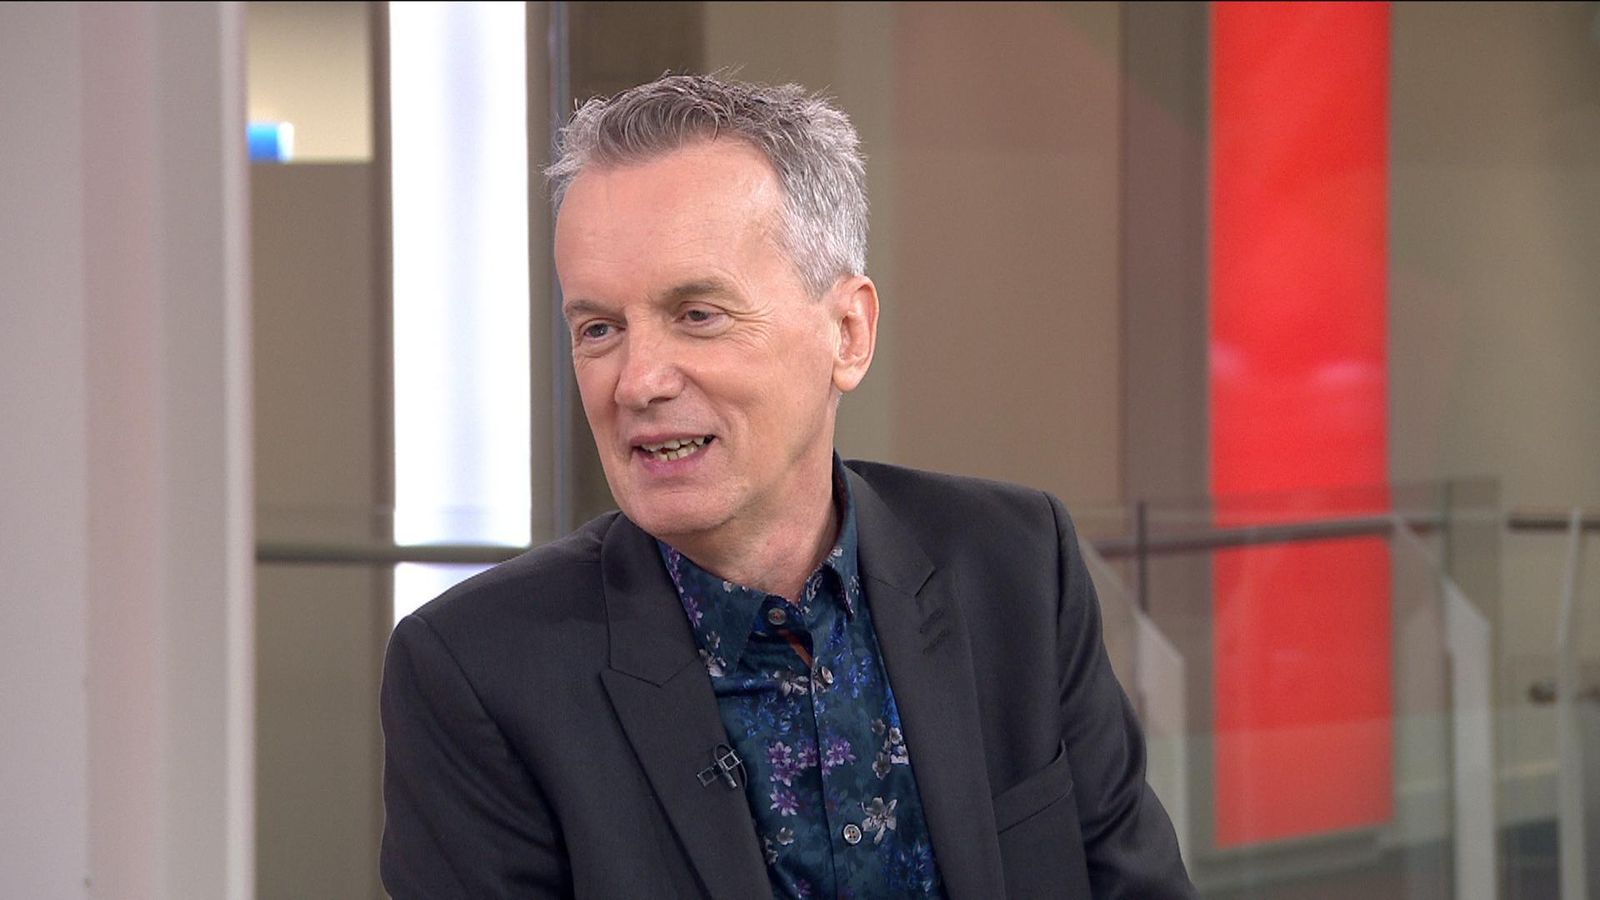 Frank Skinner breaks down in tears on live radio as he reveals friend Gareth Richards is fighting for his life after crash